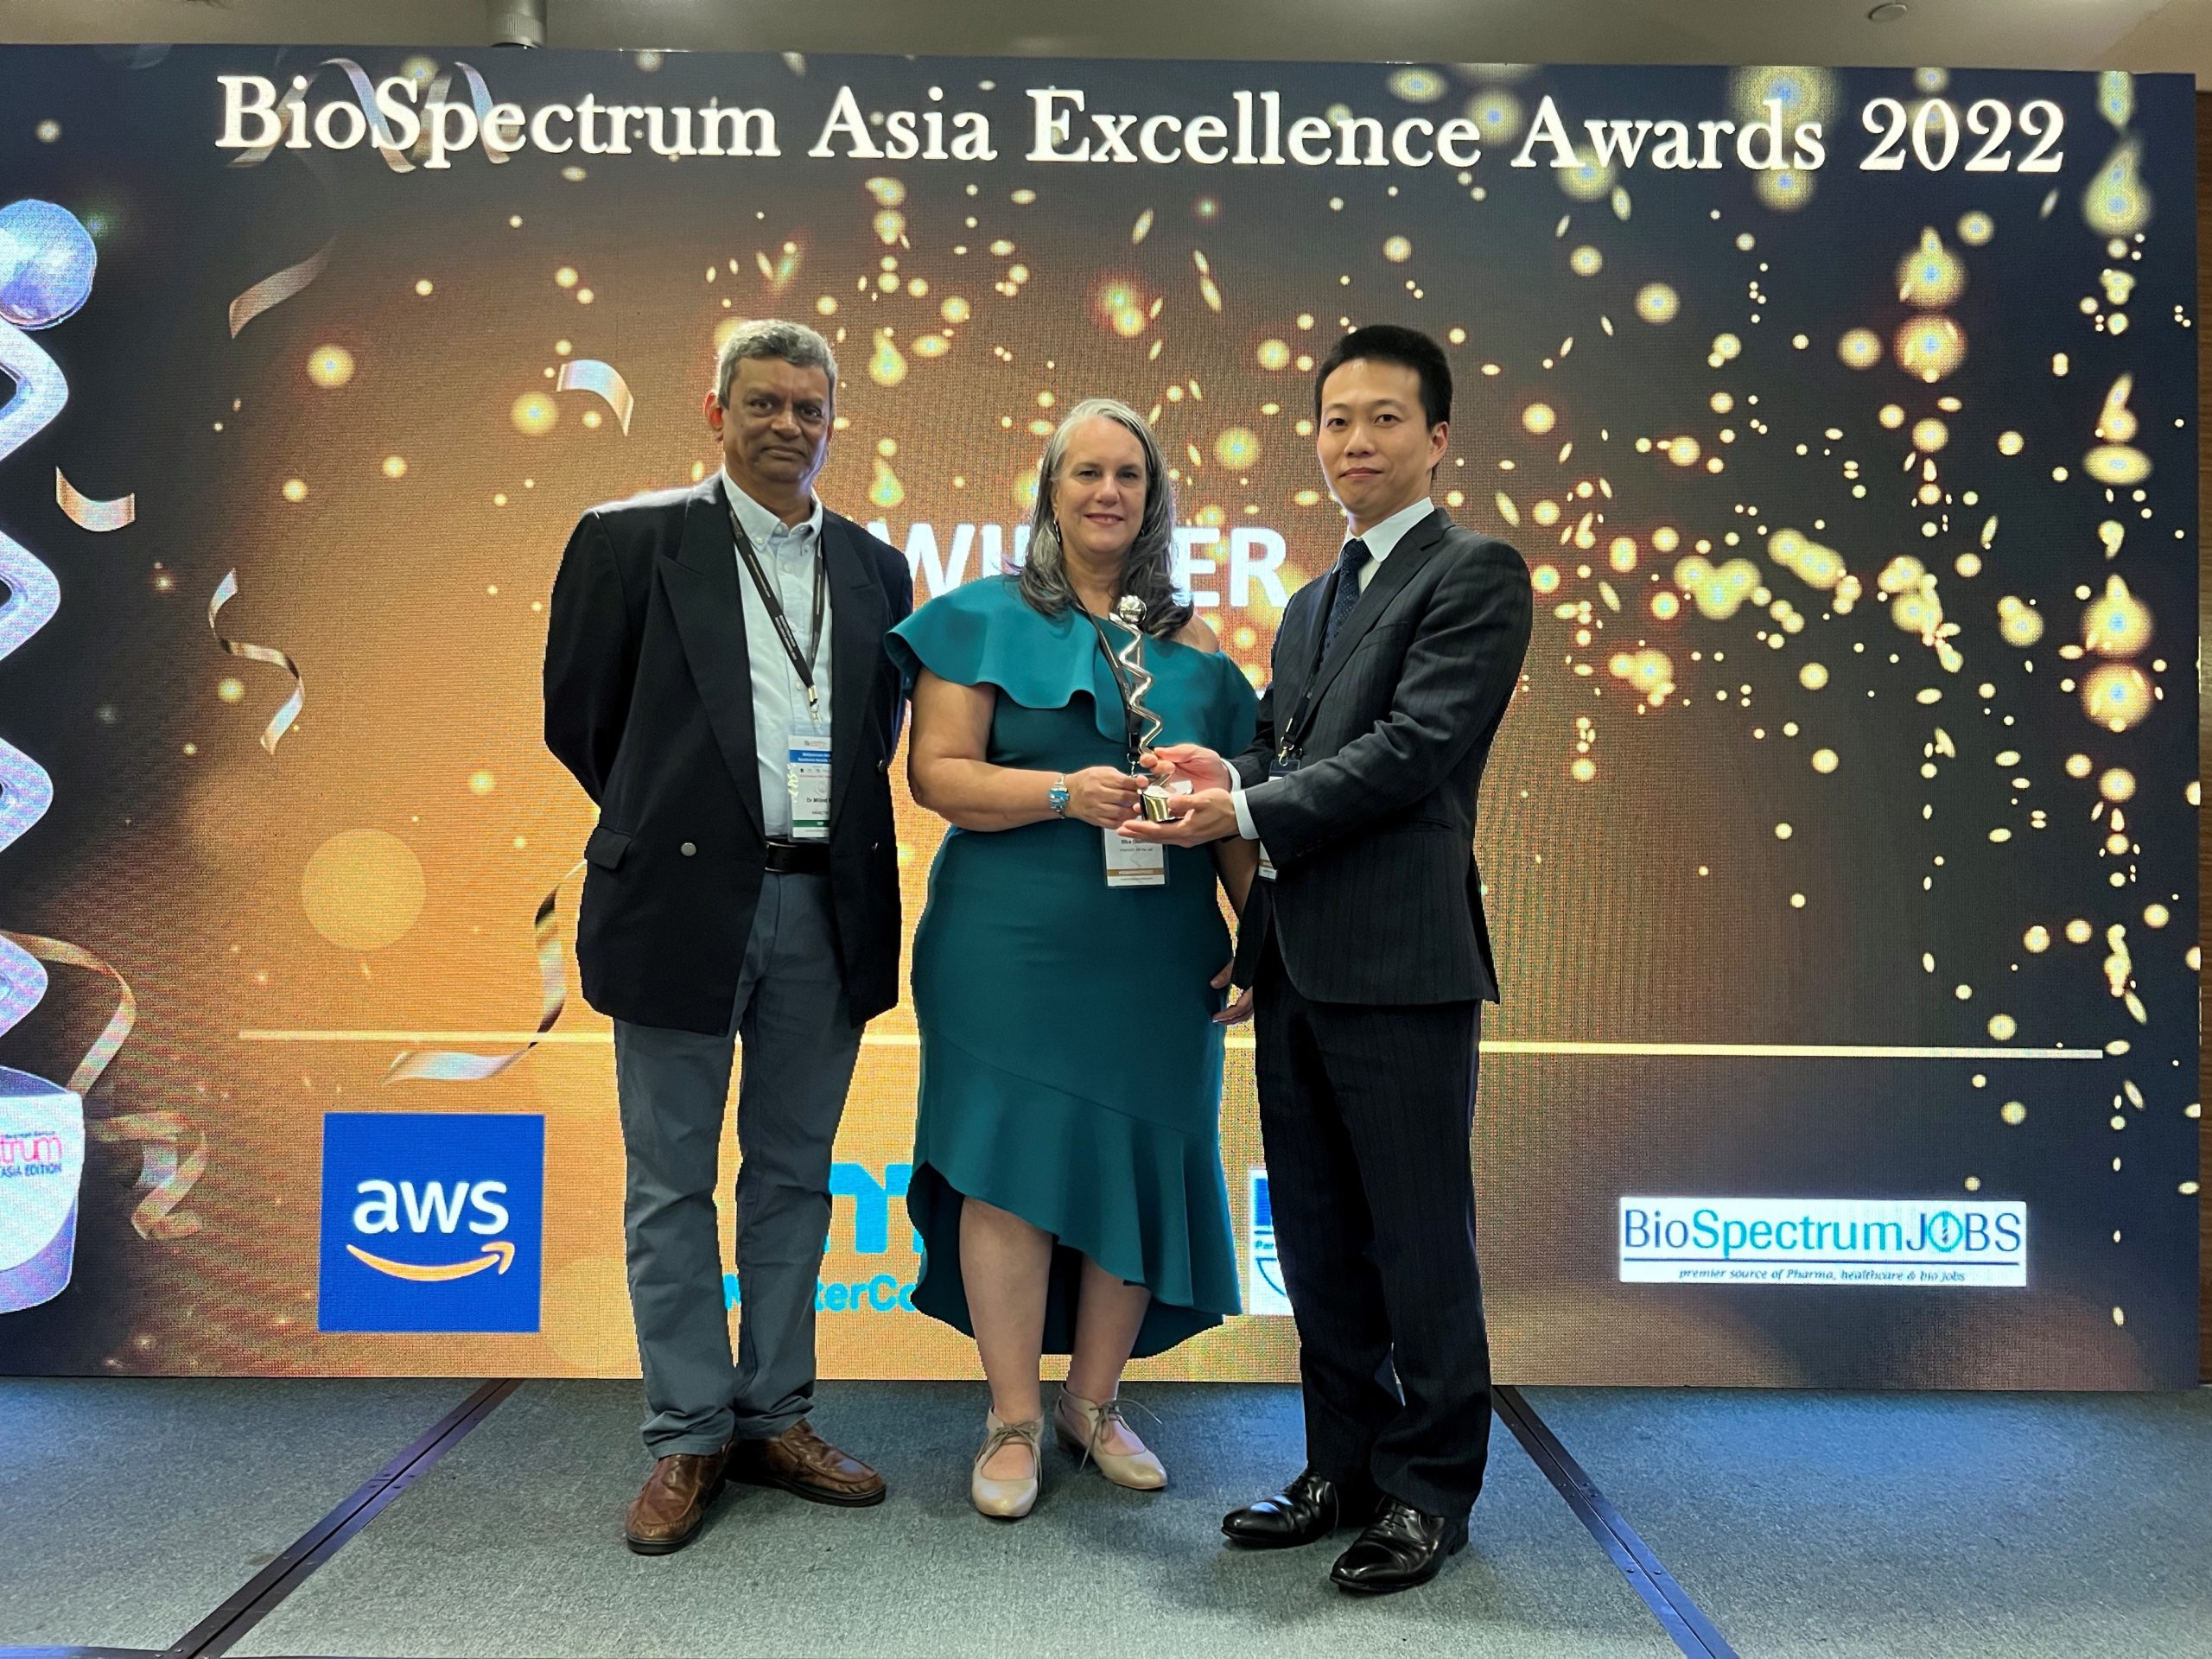 I Peace received Bio Spectrum Asia Excellence Ward 2022